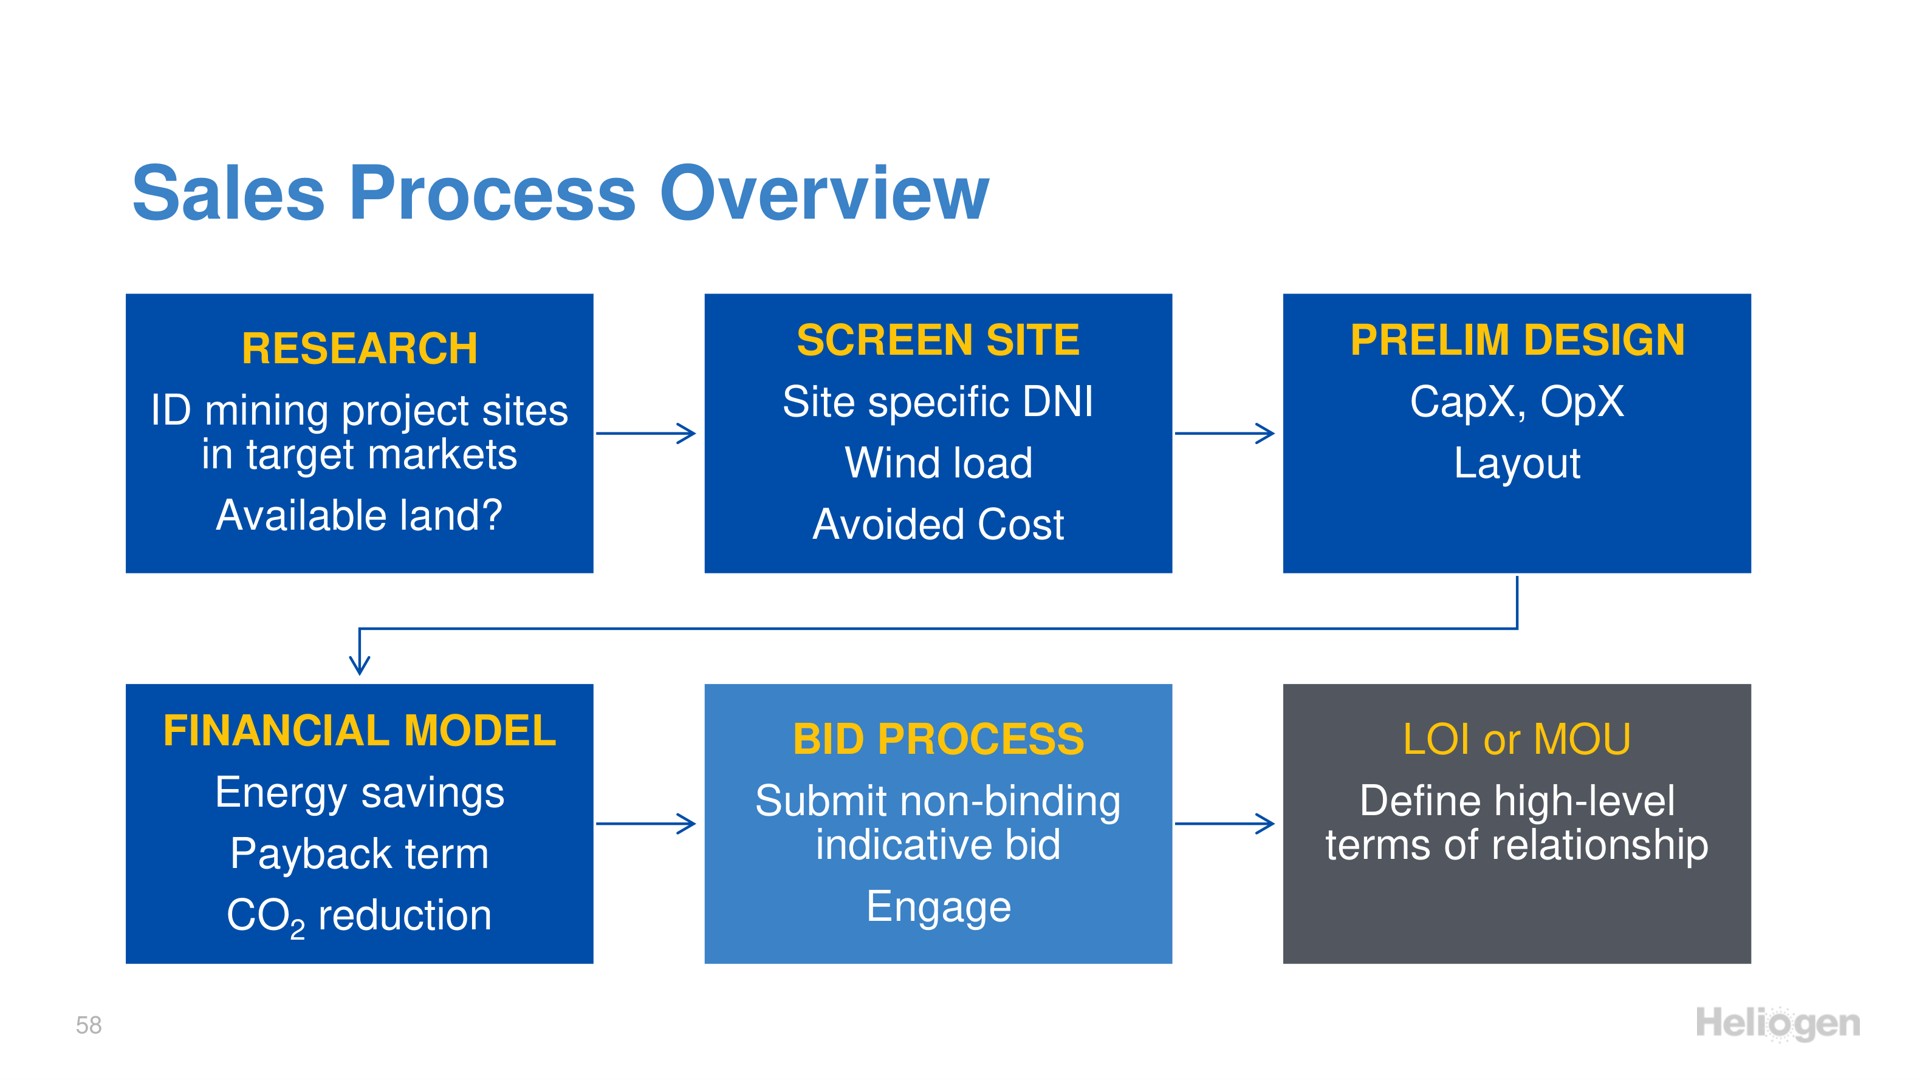 sales process overview mining project sites in target markets site specific wind load layout | Heliogen